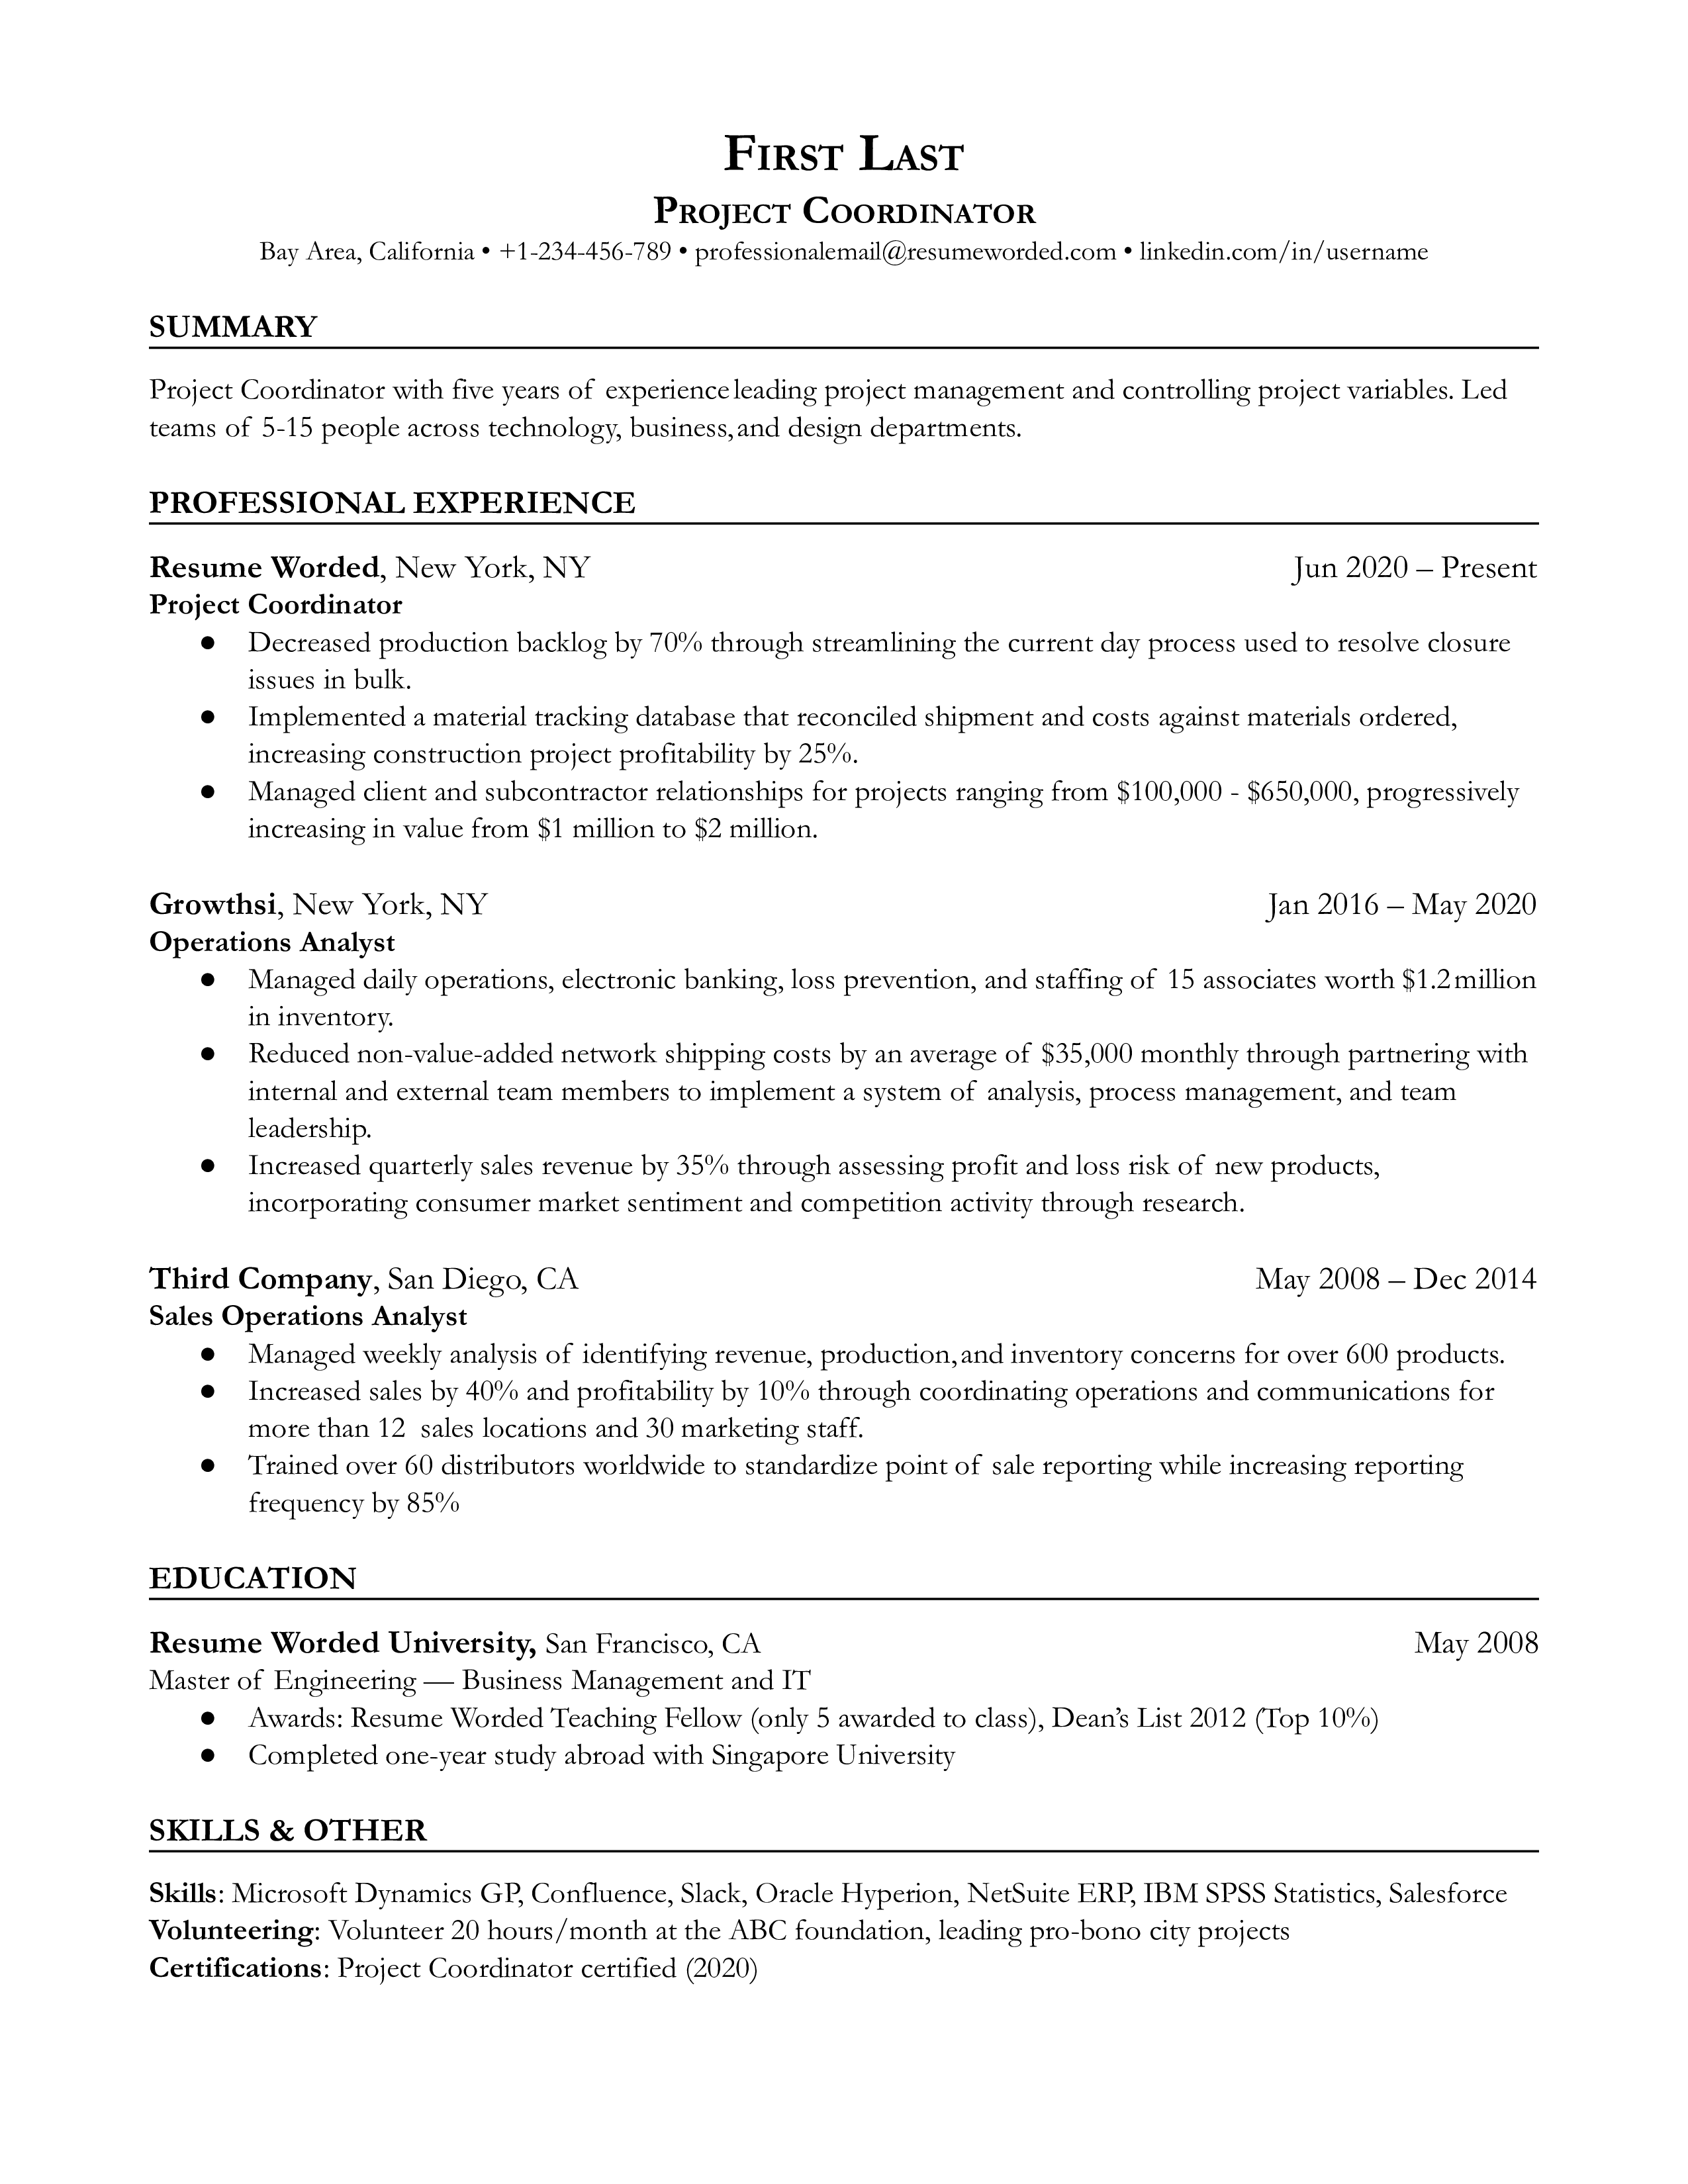 Project coordinator resume with strong action verbs and measurable achievements